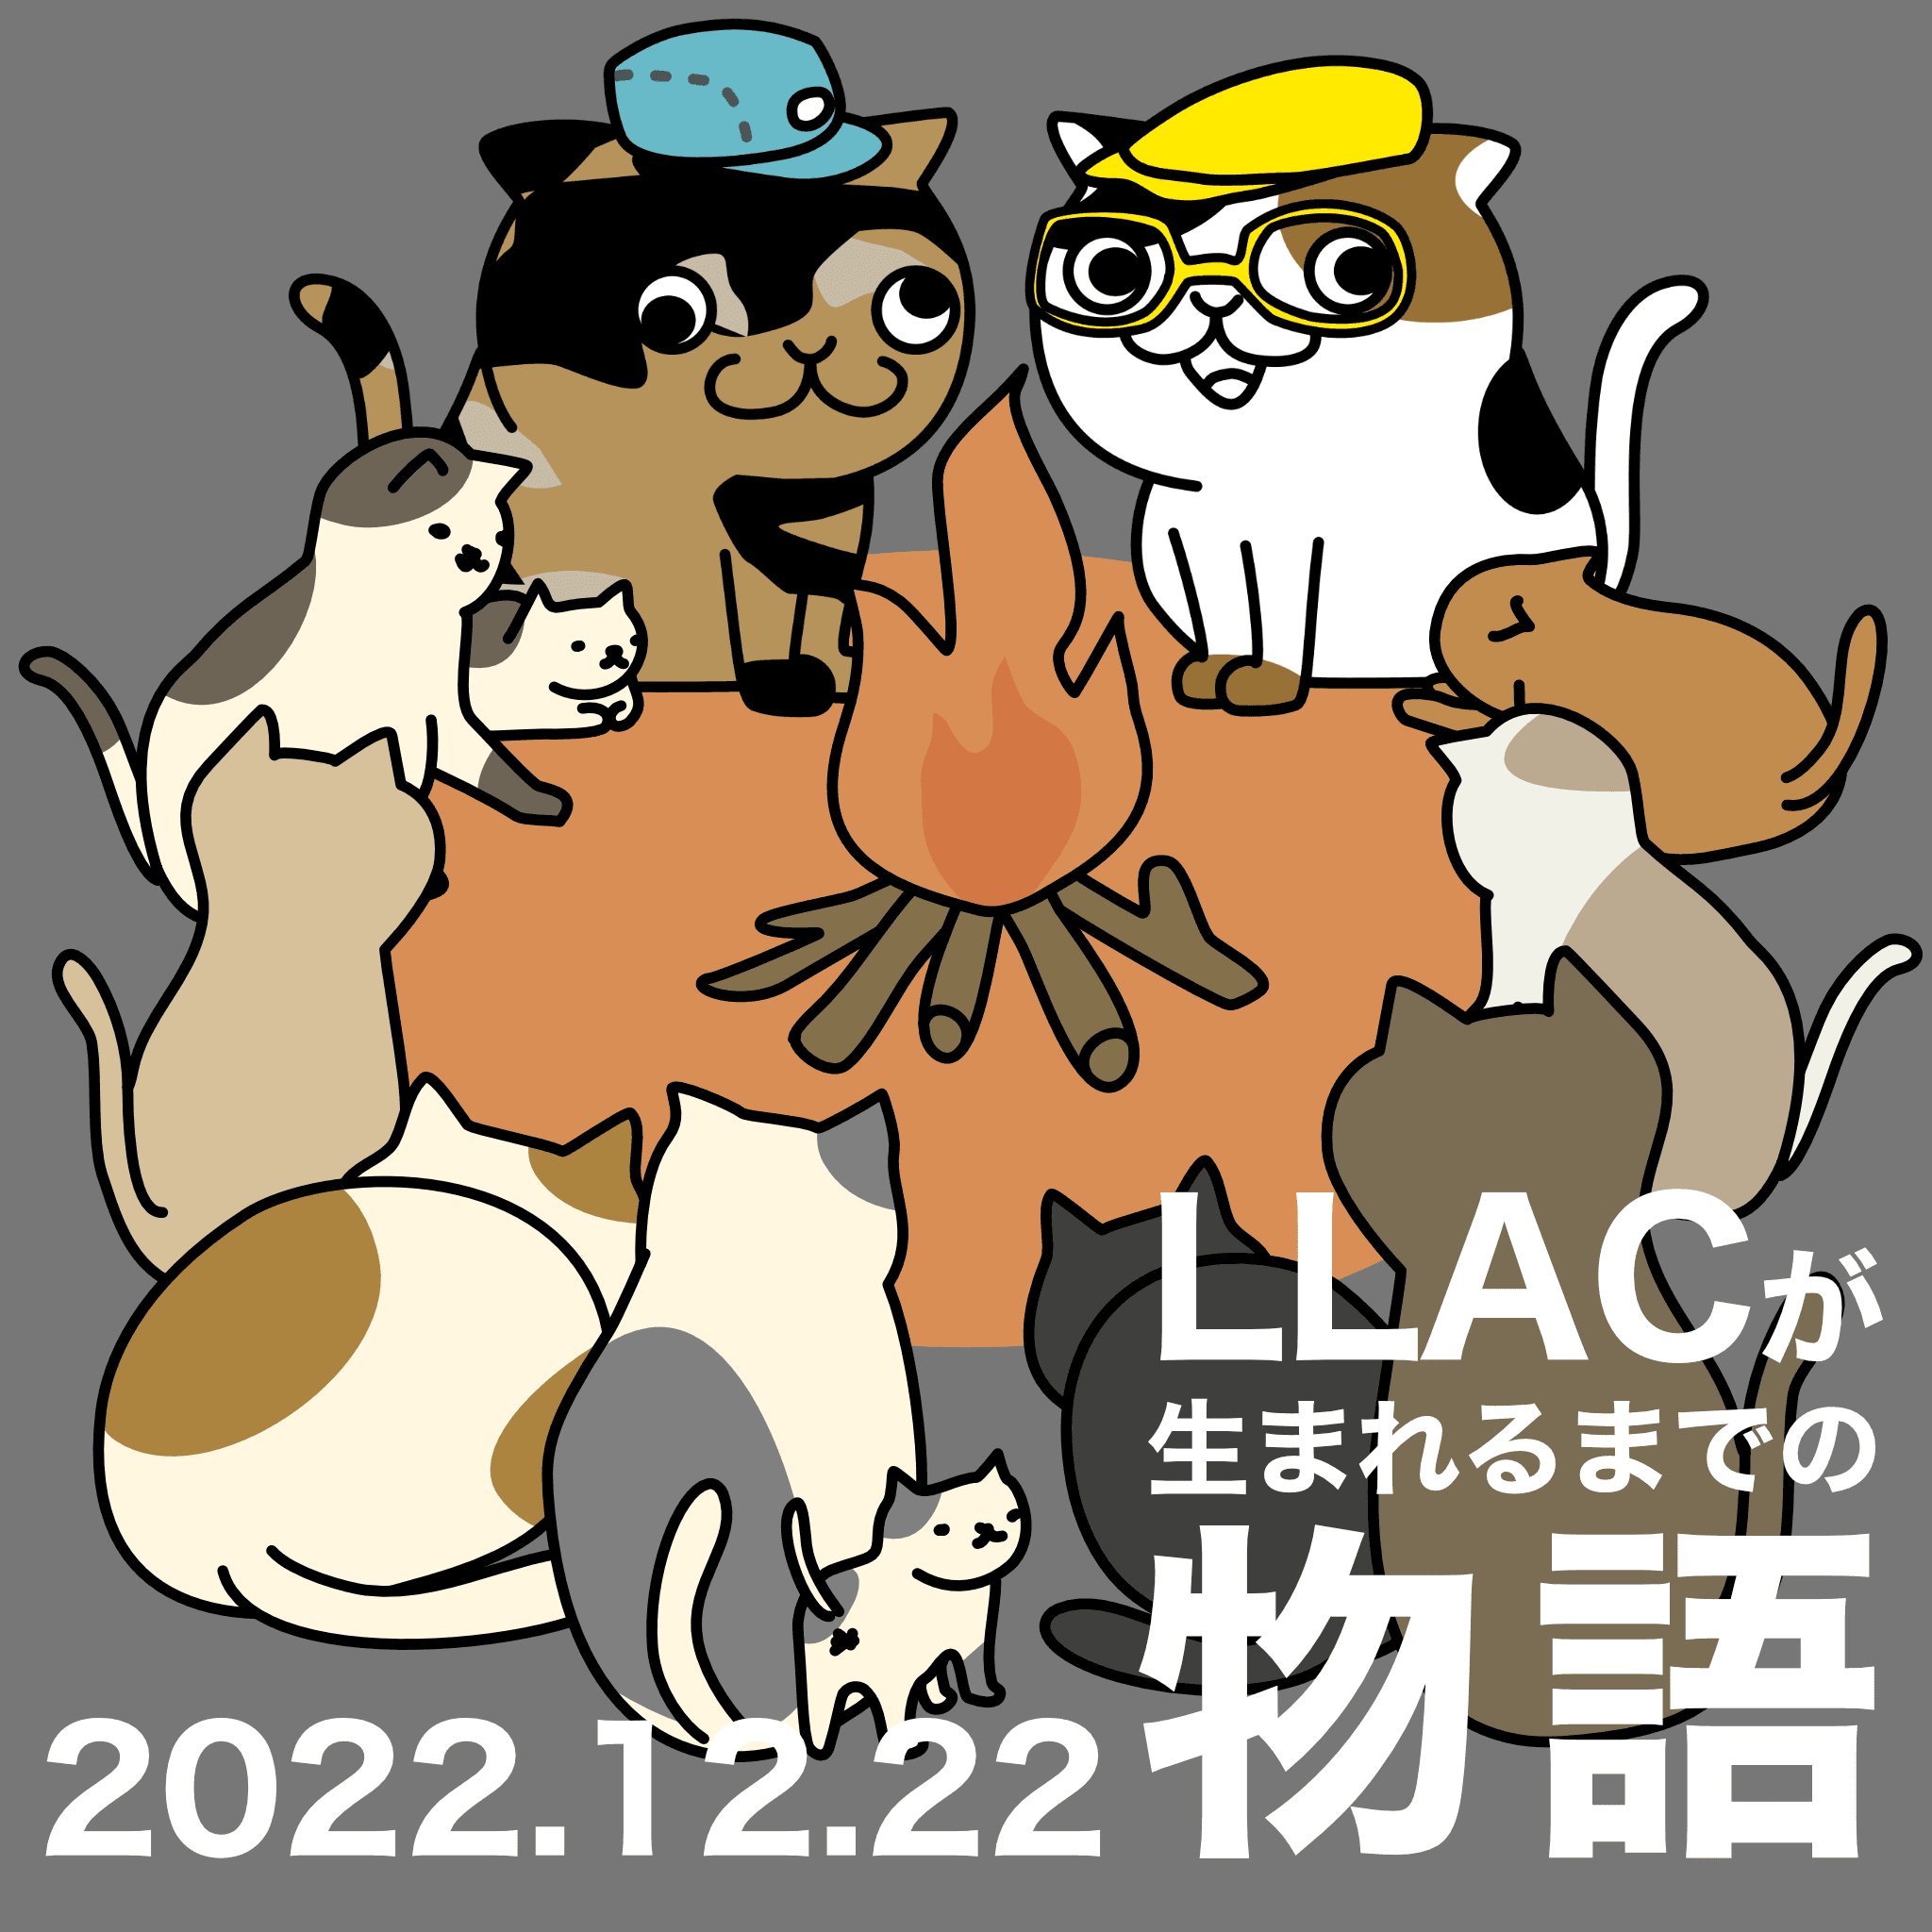 The Story of LLAC. Dec. 22, 2022